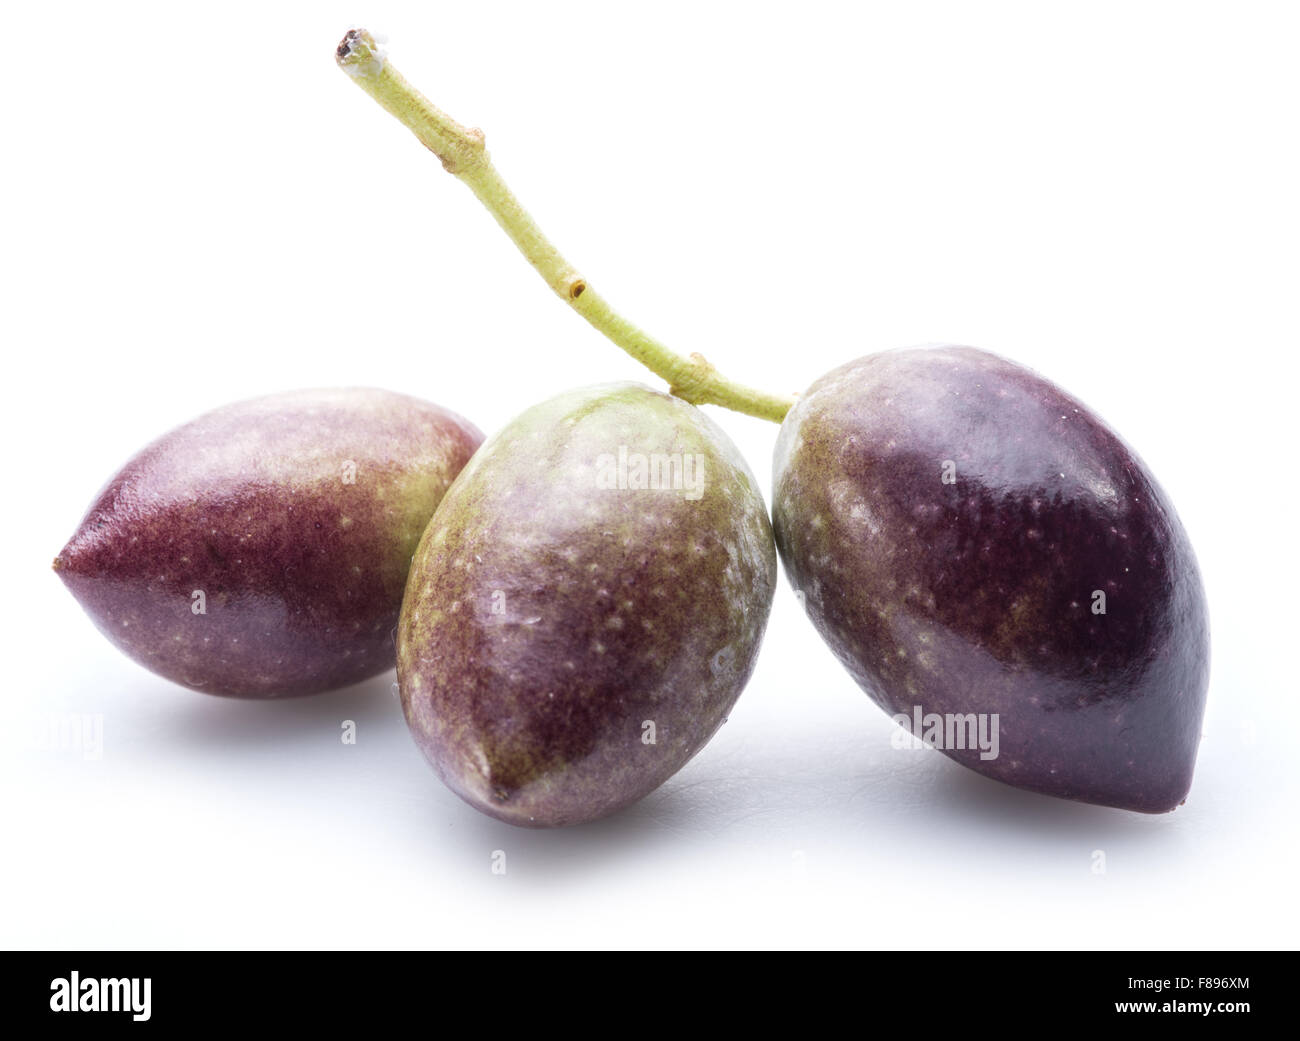 Half-ripe (semi-ripe) fresh olives with leaves on the white background. Stock Photo